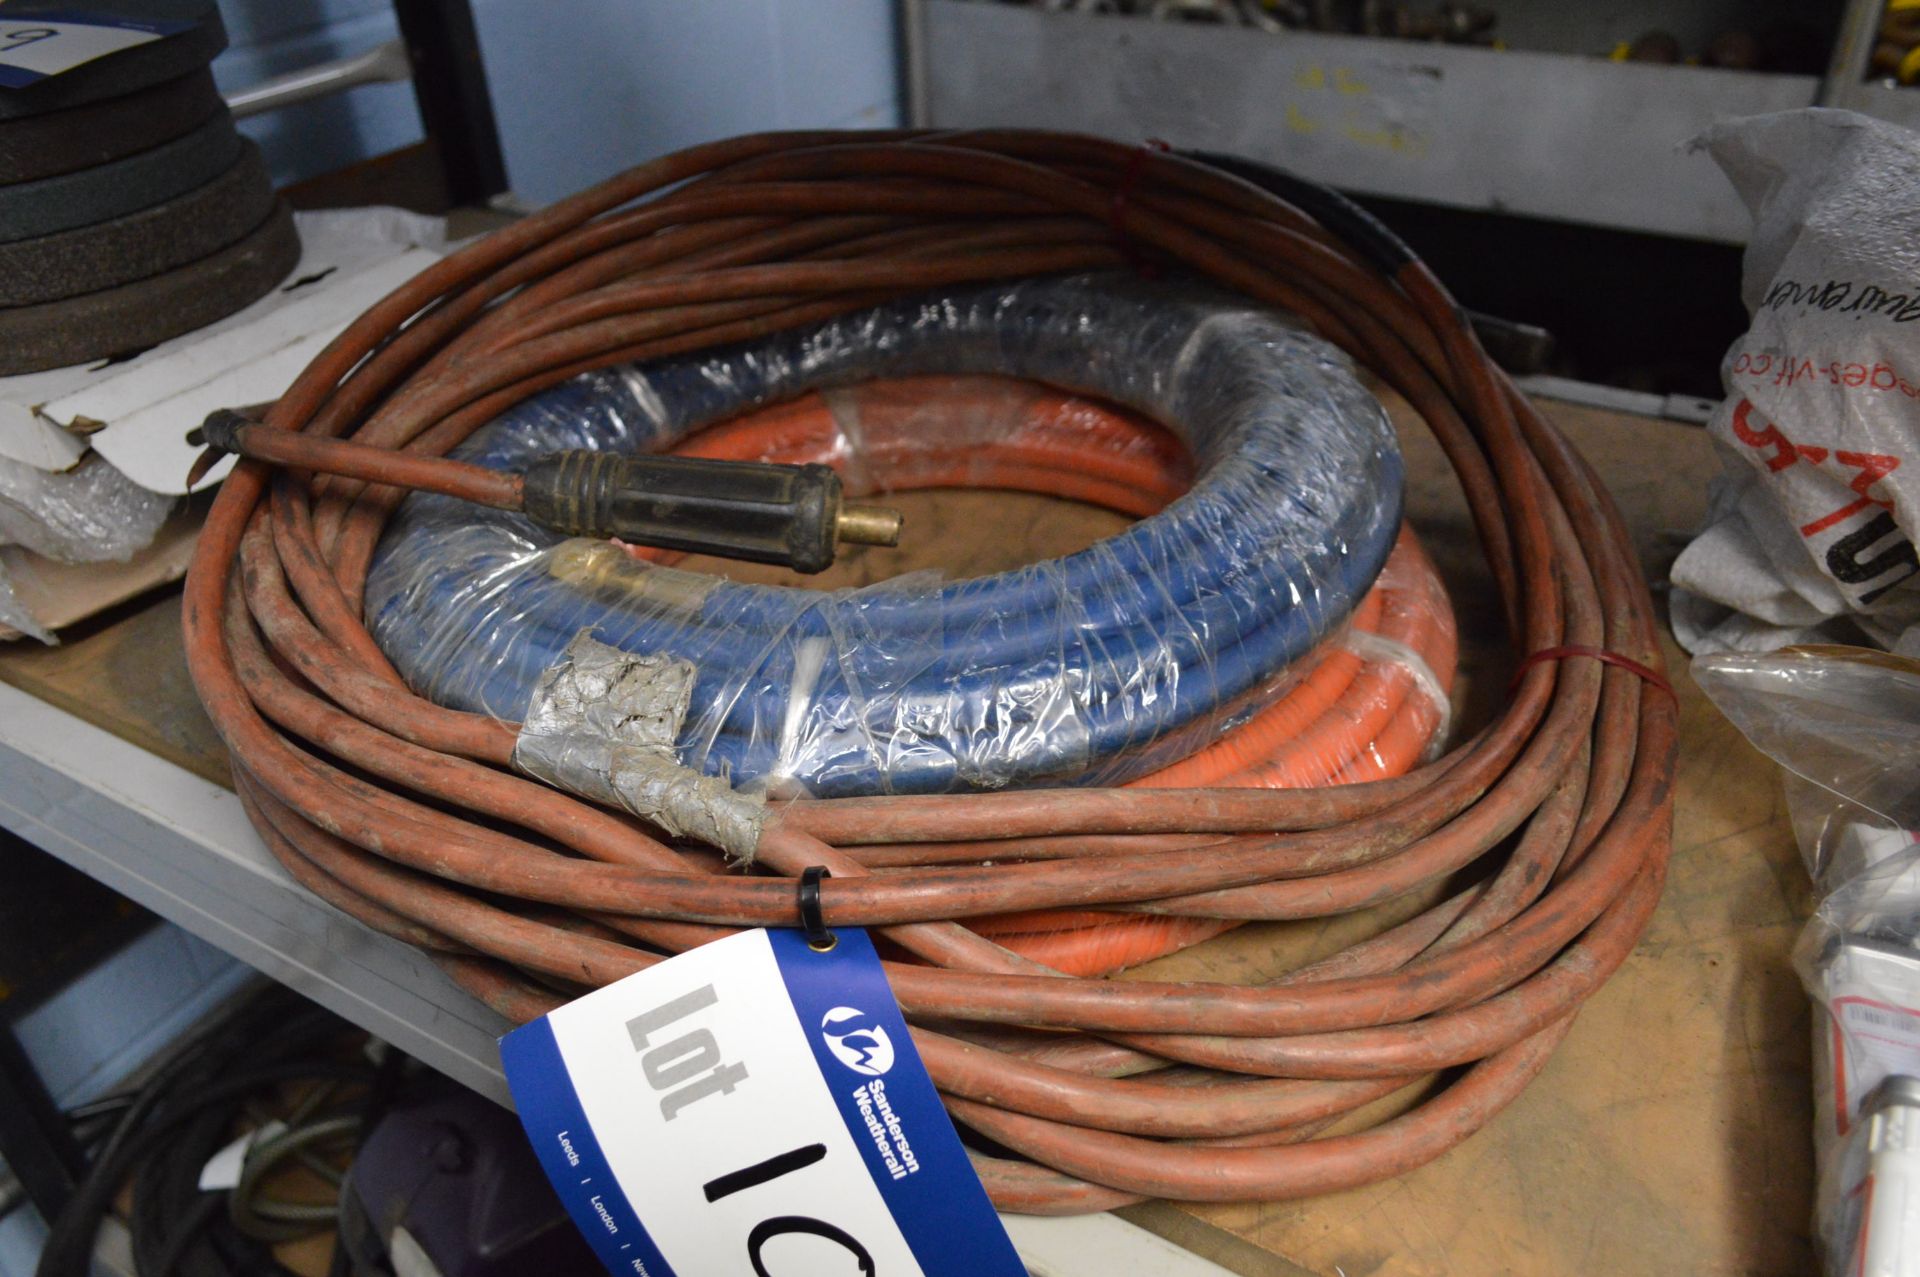 Hoses, in one stack